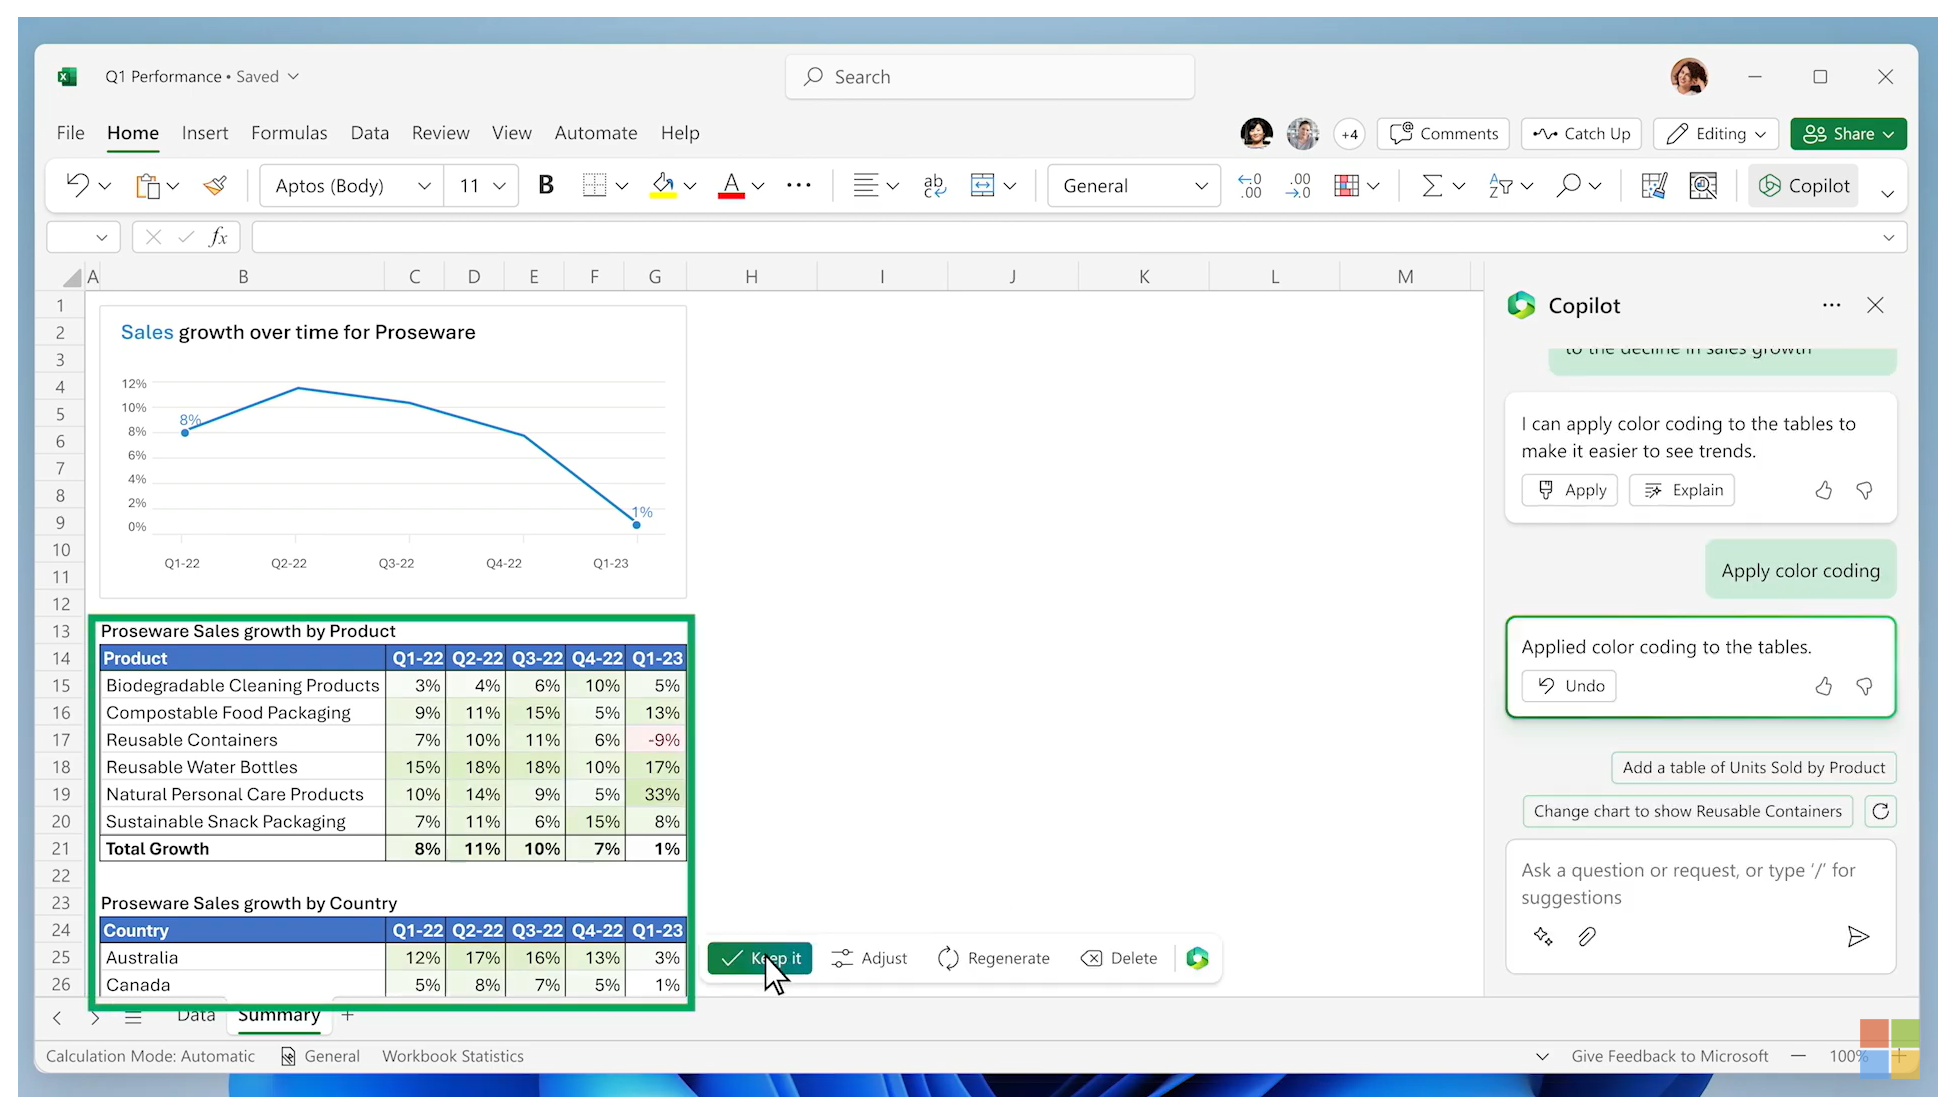 A screenshot from the Microsoft announcement video of Excel's chat AI.